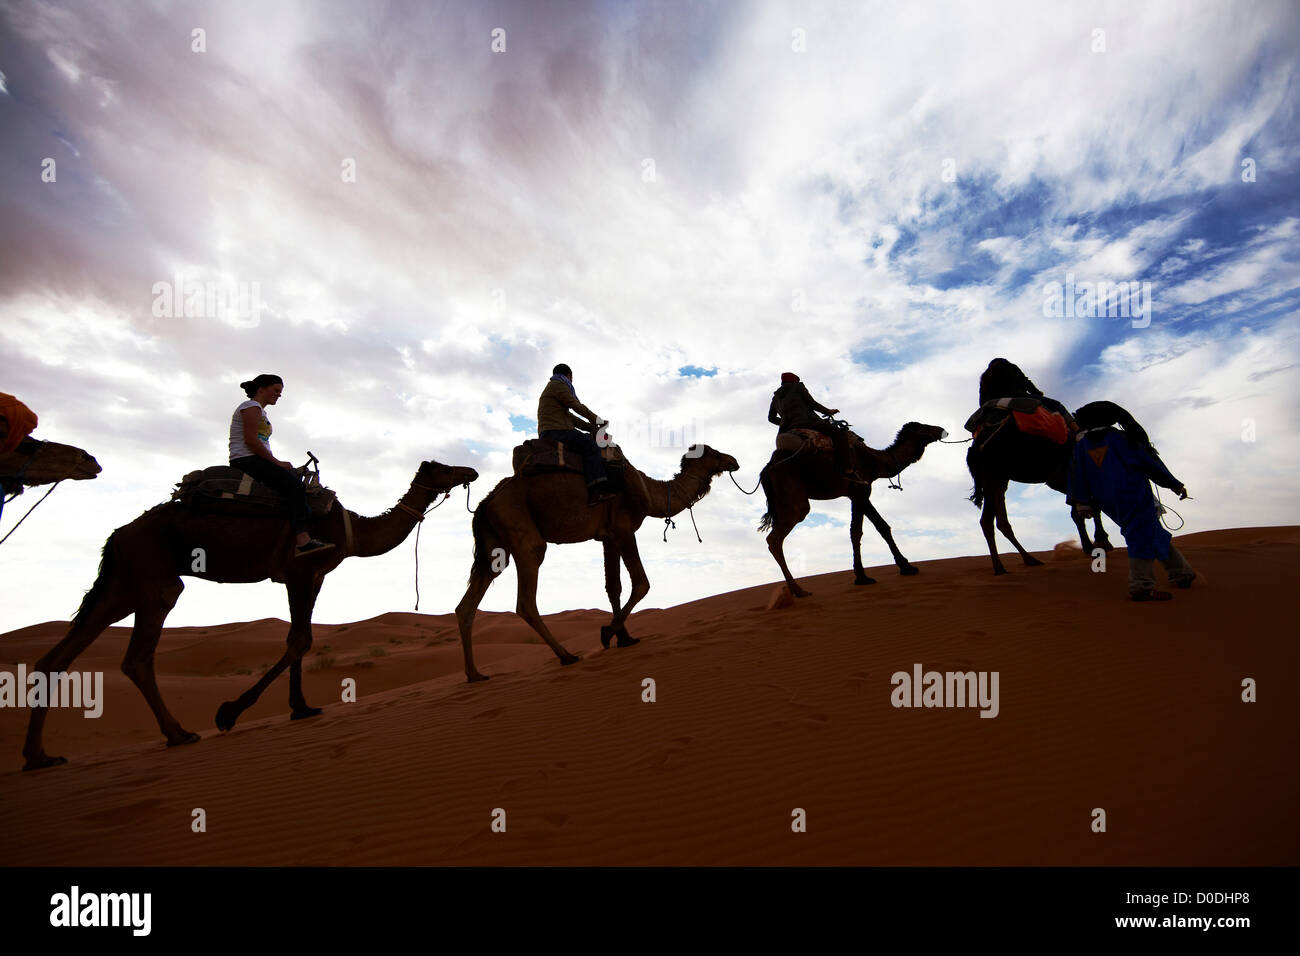 Silhouettes of camels with riders, Erg Chebbi, interior Sahara Desert ...